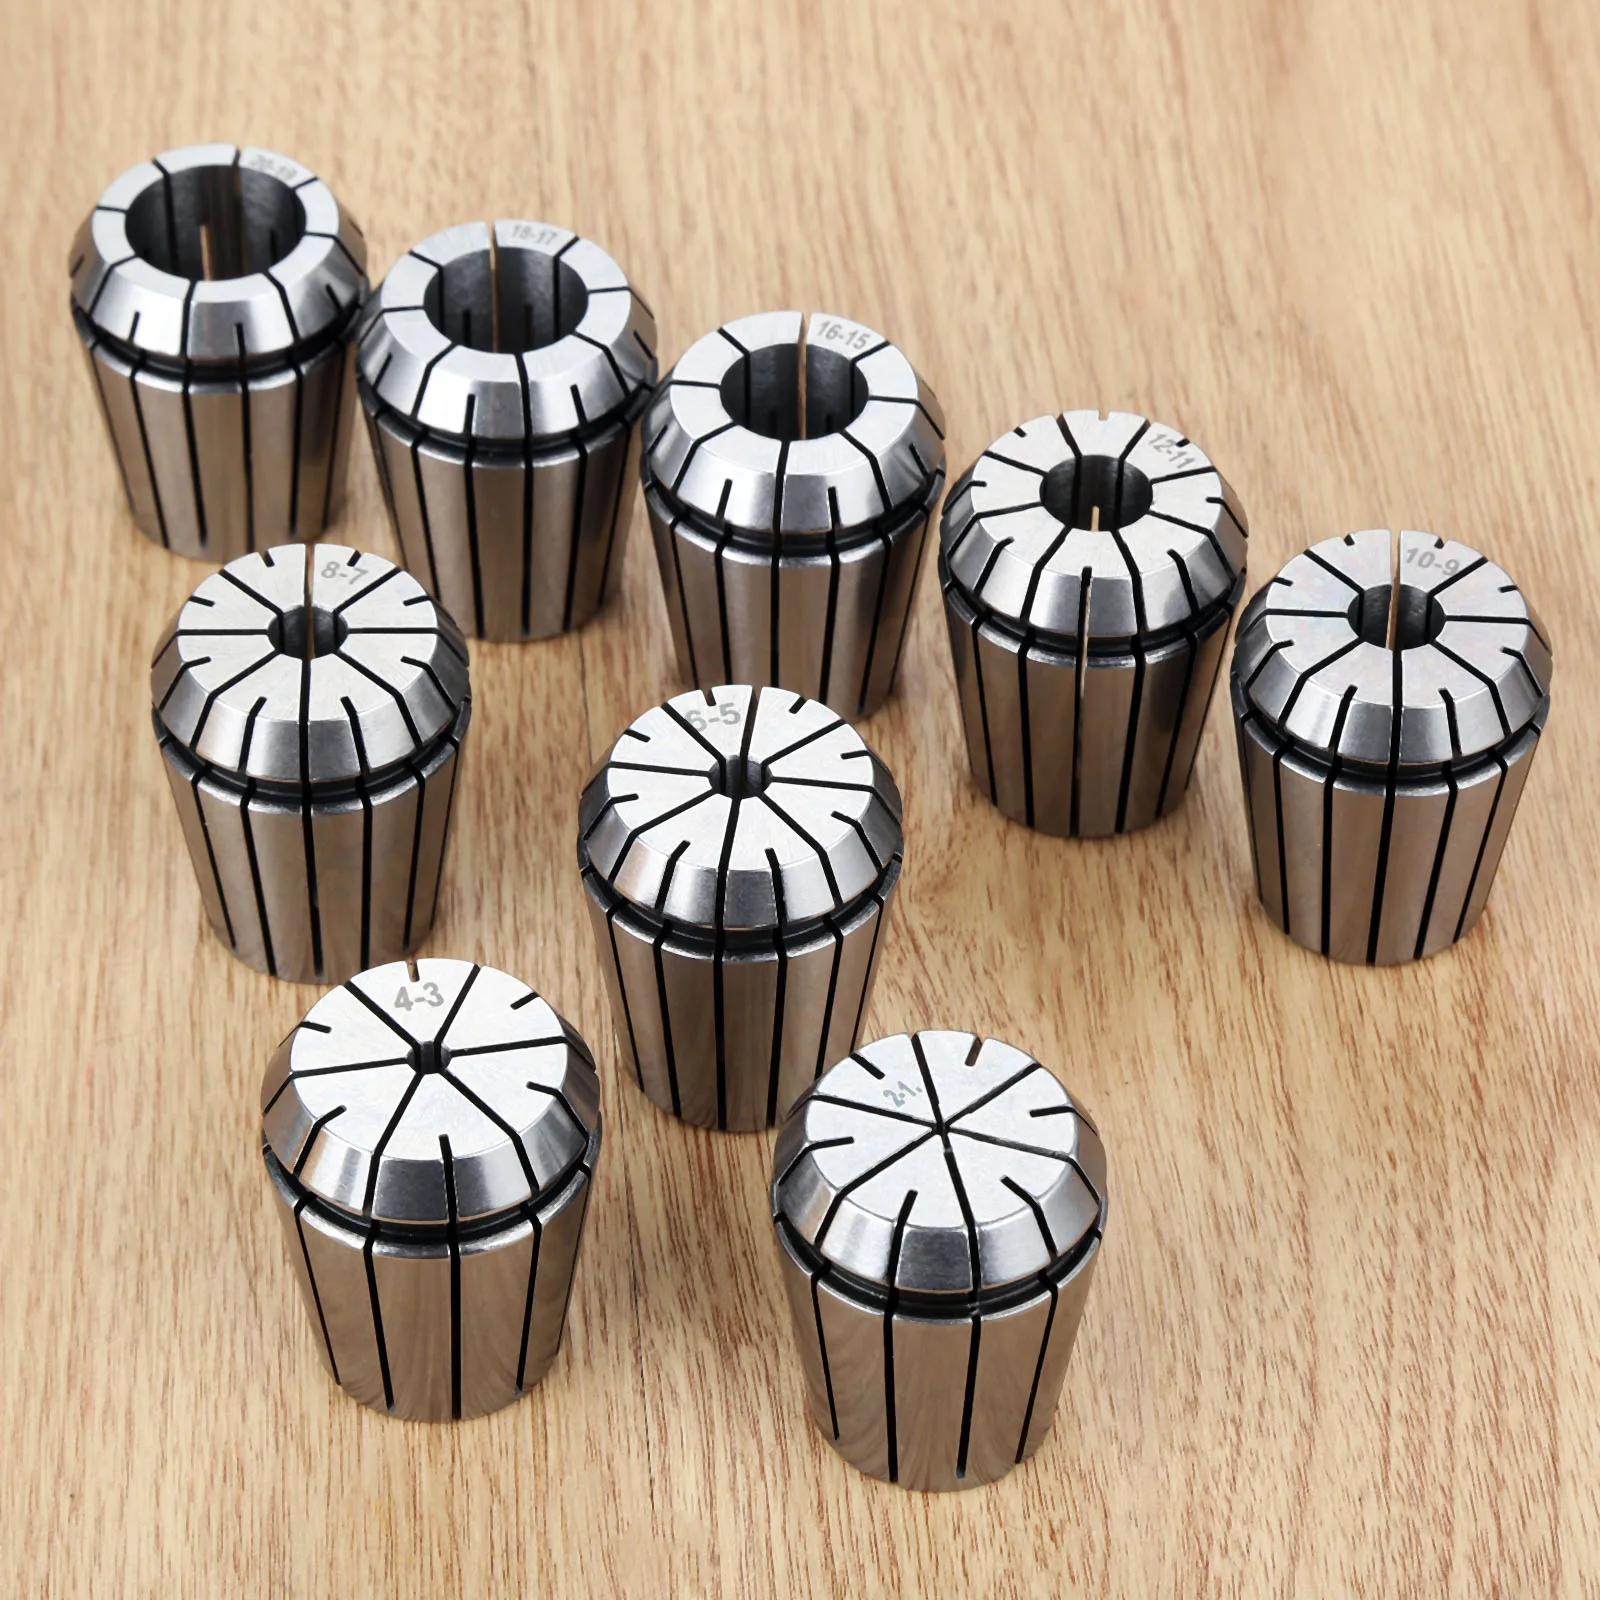 9Pcs/Lot High Quality Collets For CNC Milling Lathe Tool And Work-holding Engraving Machine Tools Part 2/4/6/8/10/12/16/18/20mm